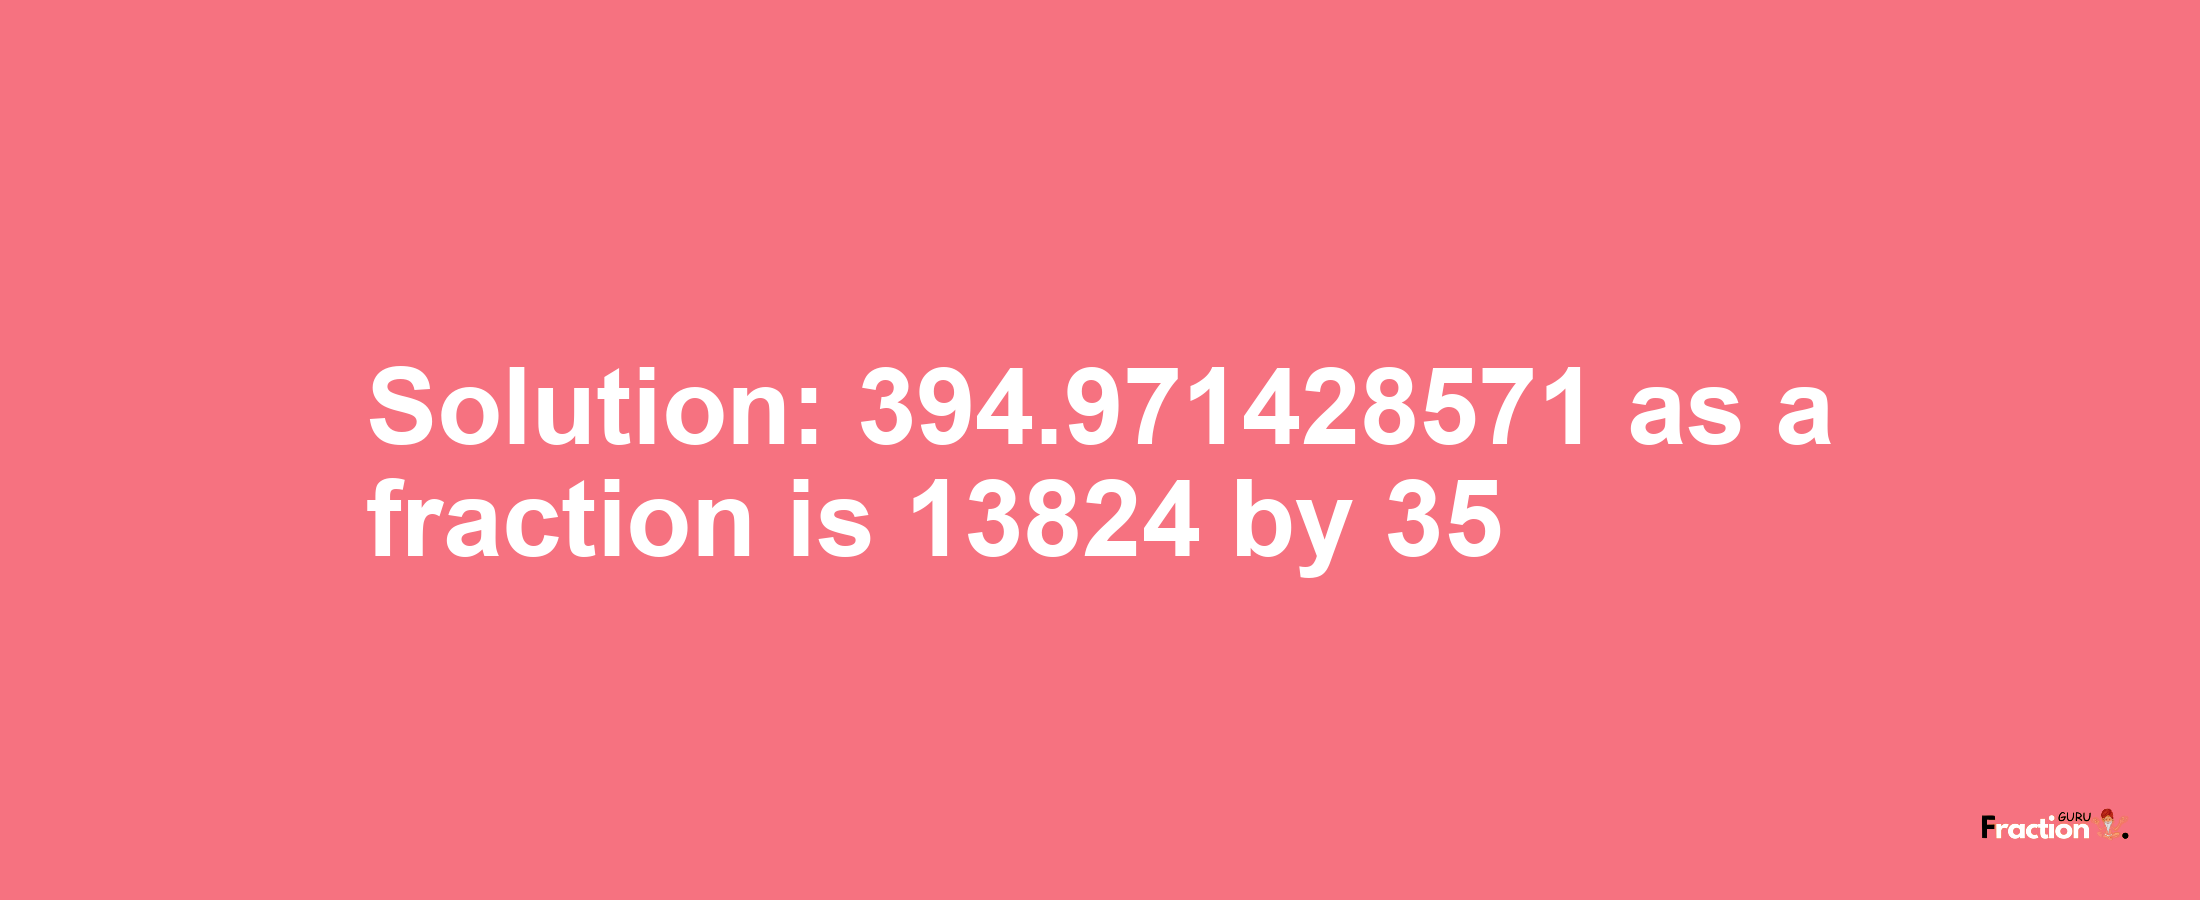 Solution:394.971428571 as a fraction is 13824/35